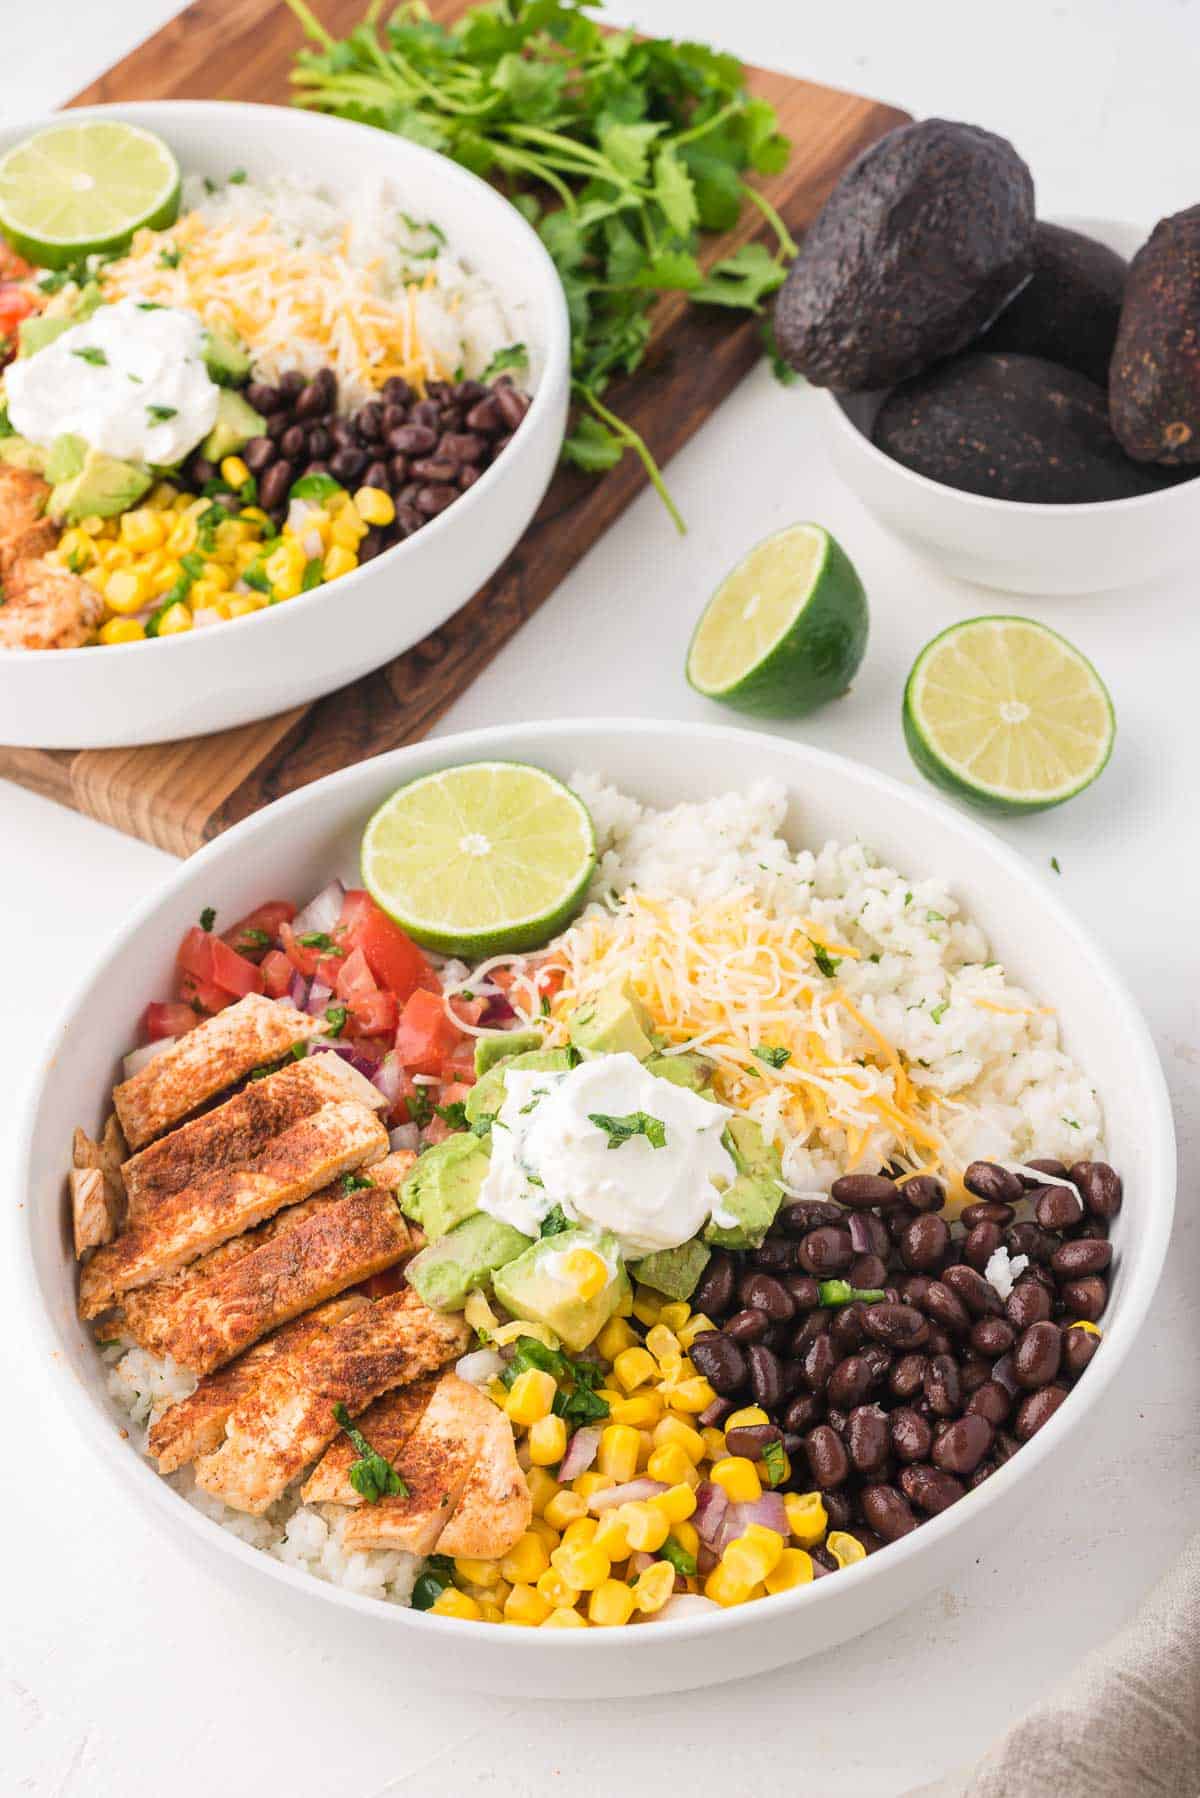 A chicken burrito bowl on a white table with another bowl in the background styled with a bowl of whole avocados and a lime sliced in half.